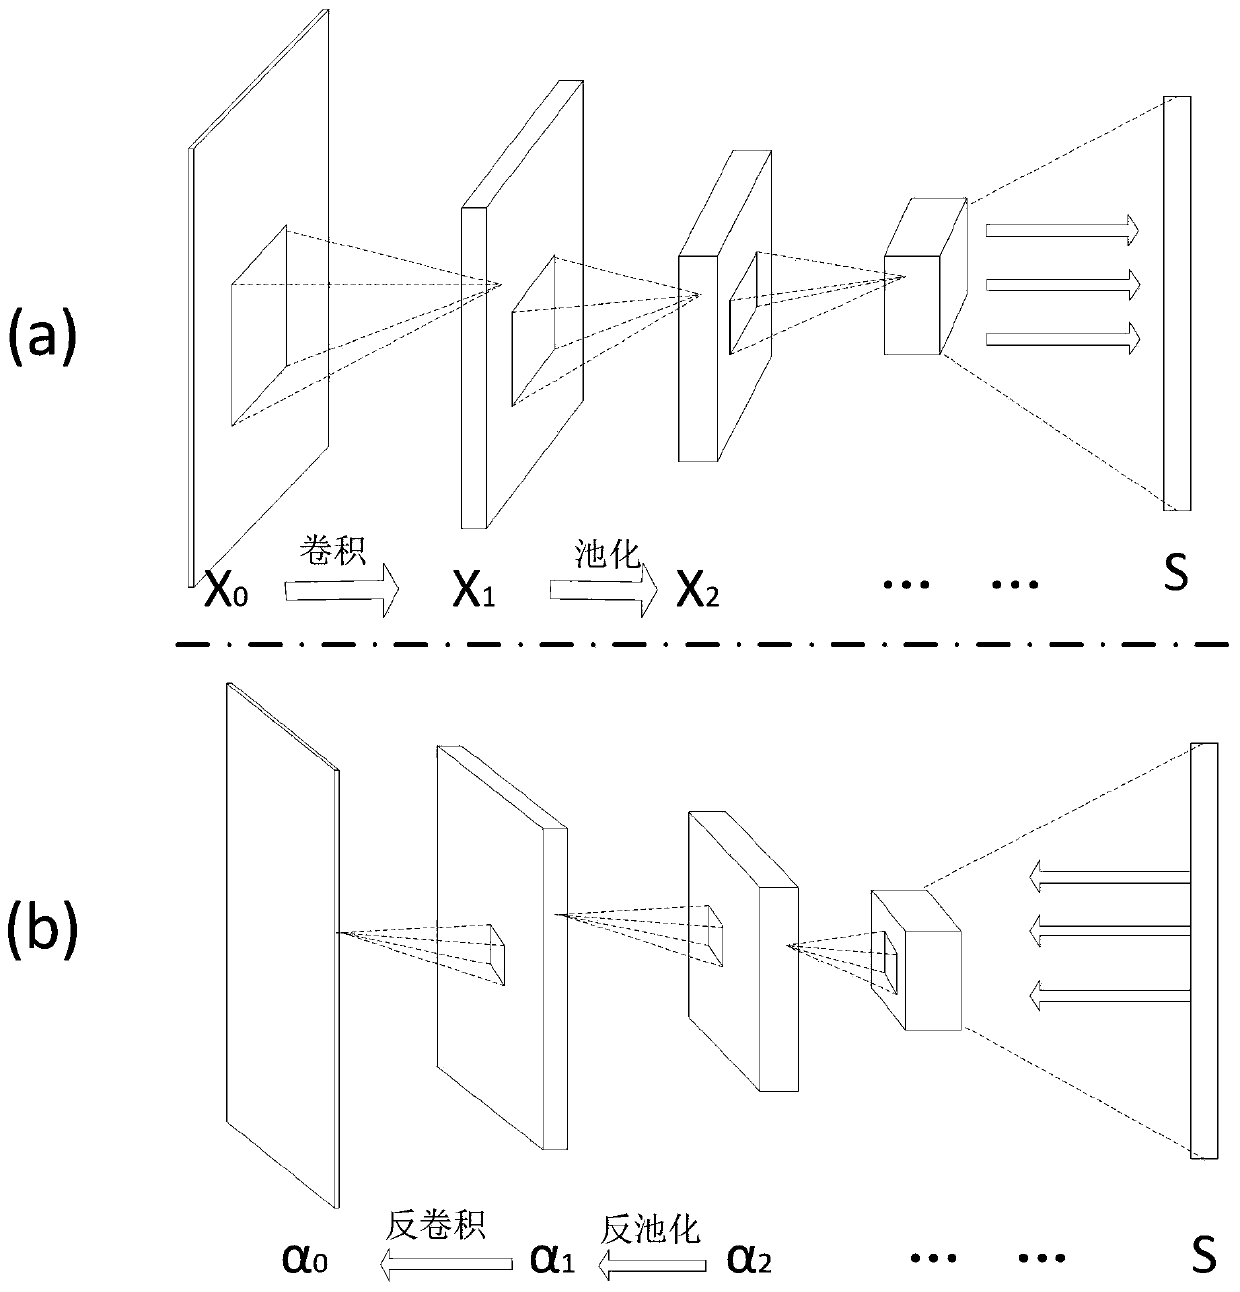 airport X-ray contraband image detection method based on an attention mechanism